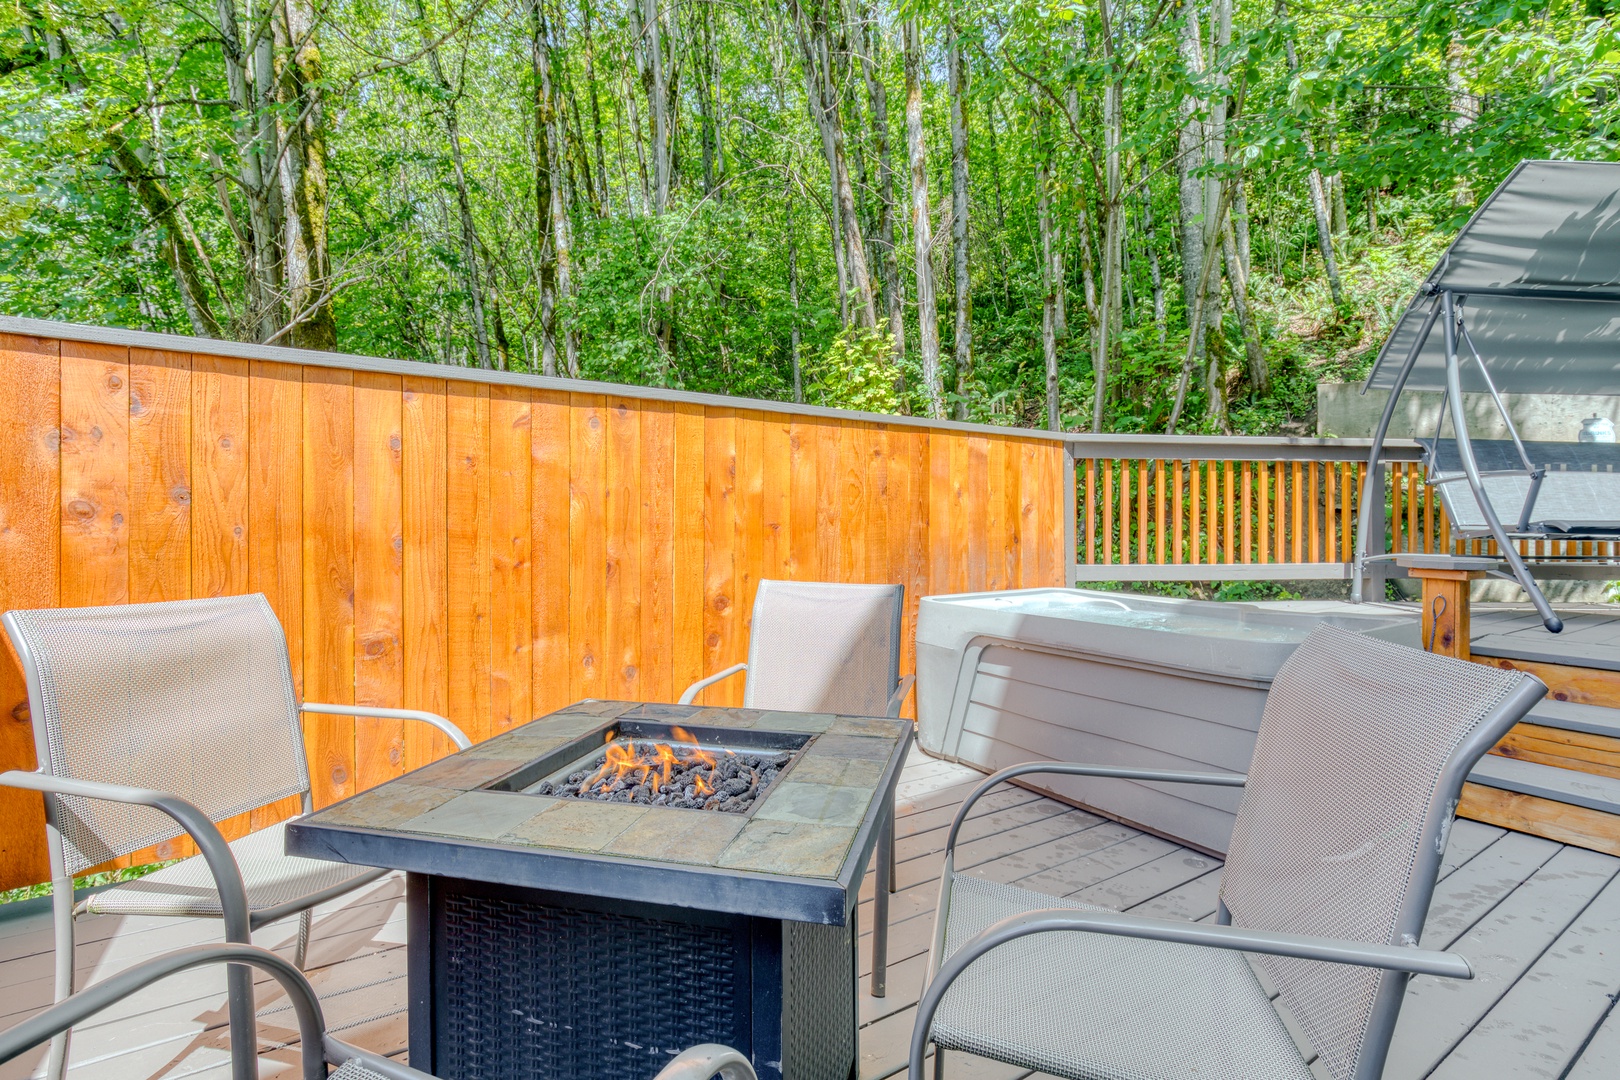 Clackamas Vacation Rentals, Duck Crossing - There's a tall fence around the patio for privacy